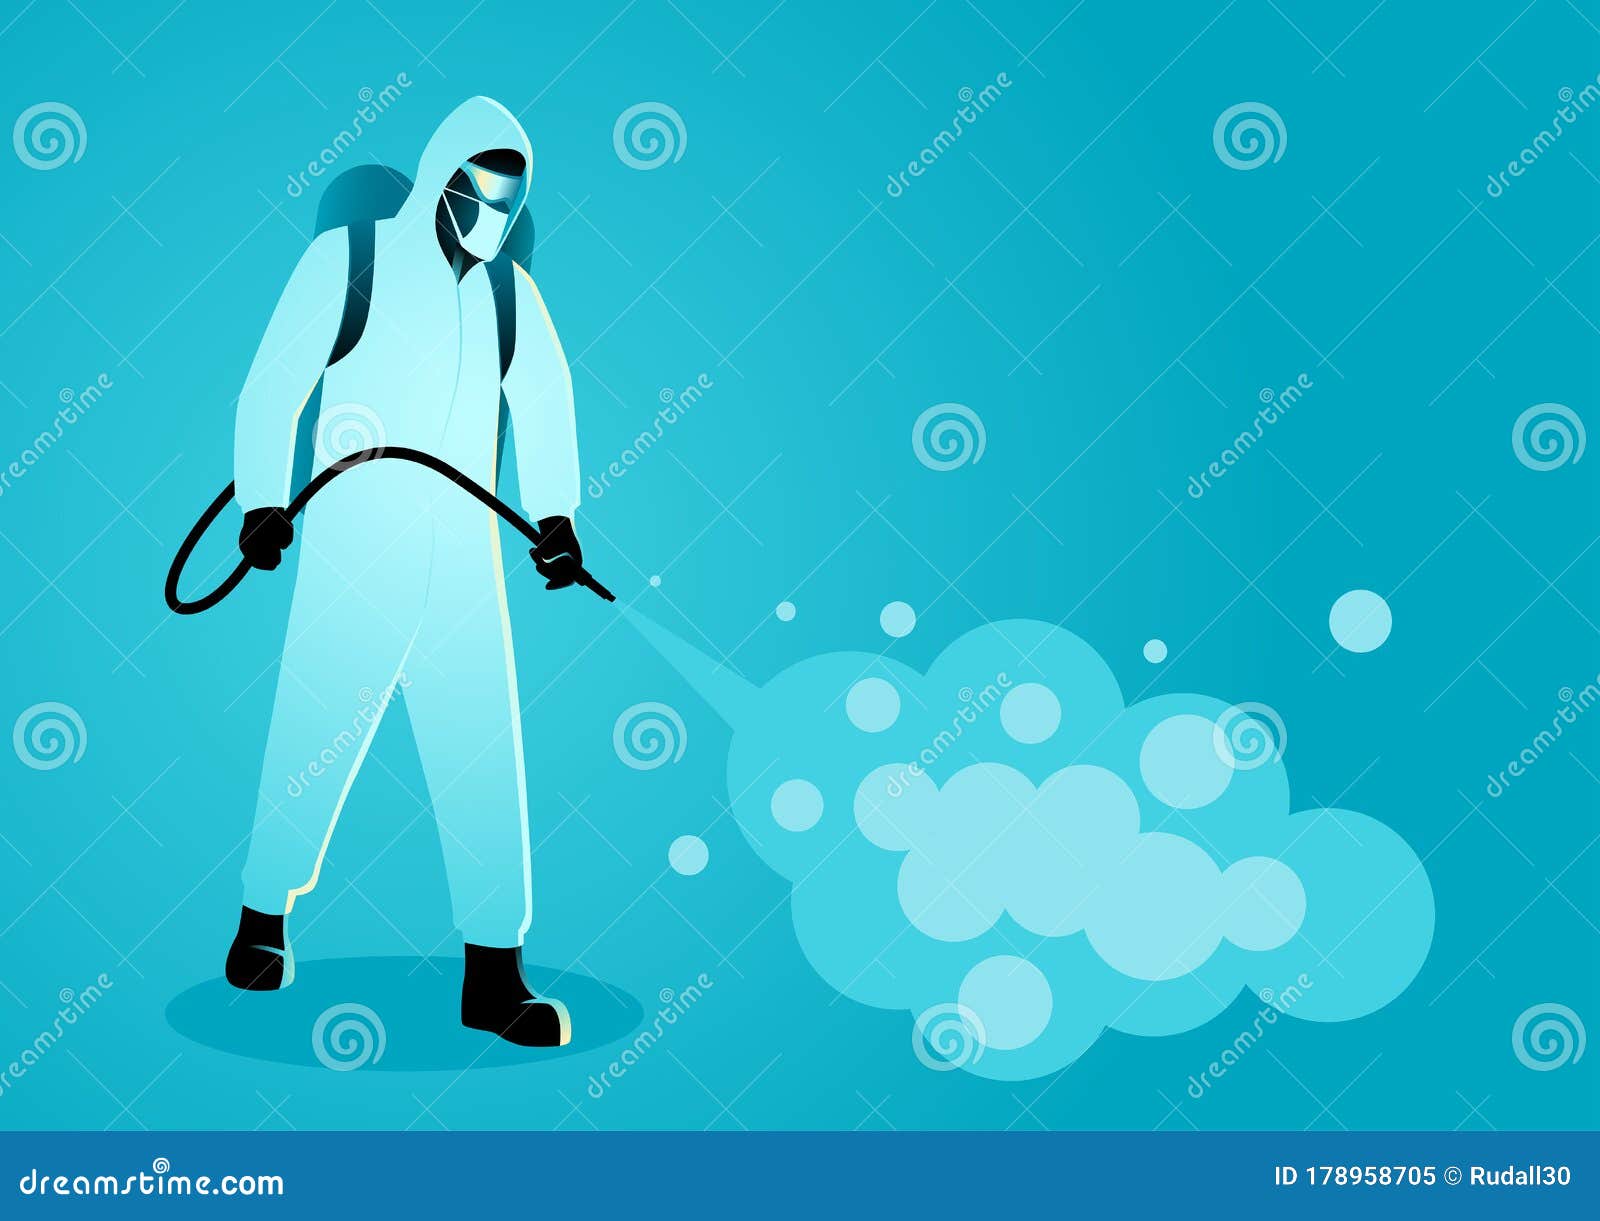 man in protective suit spraying disinfectant to cleaning and disinfect virus